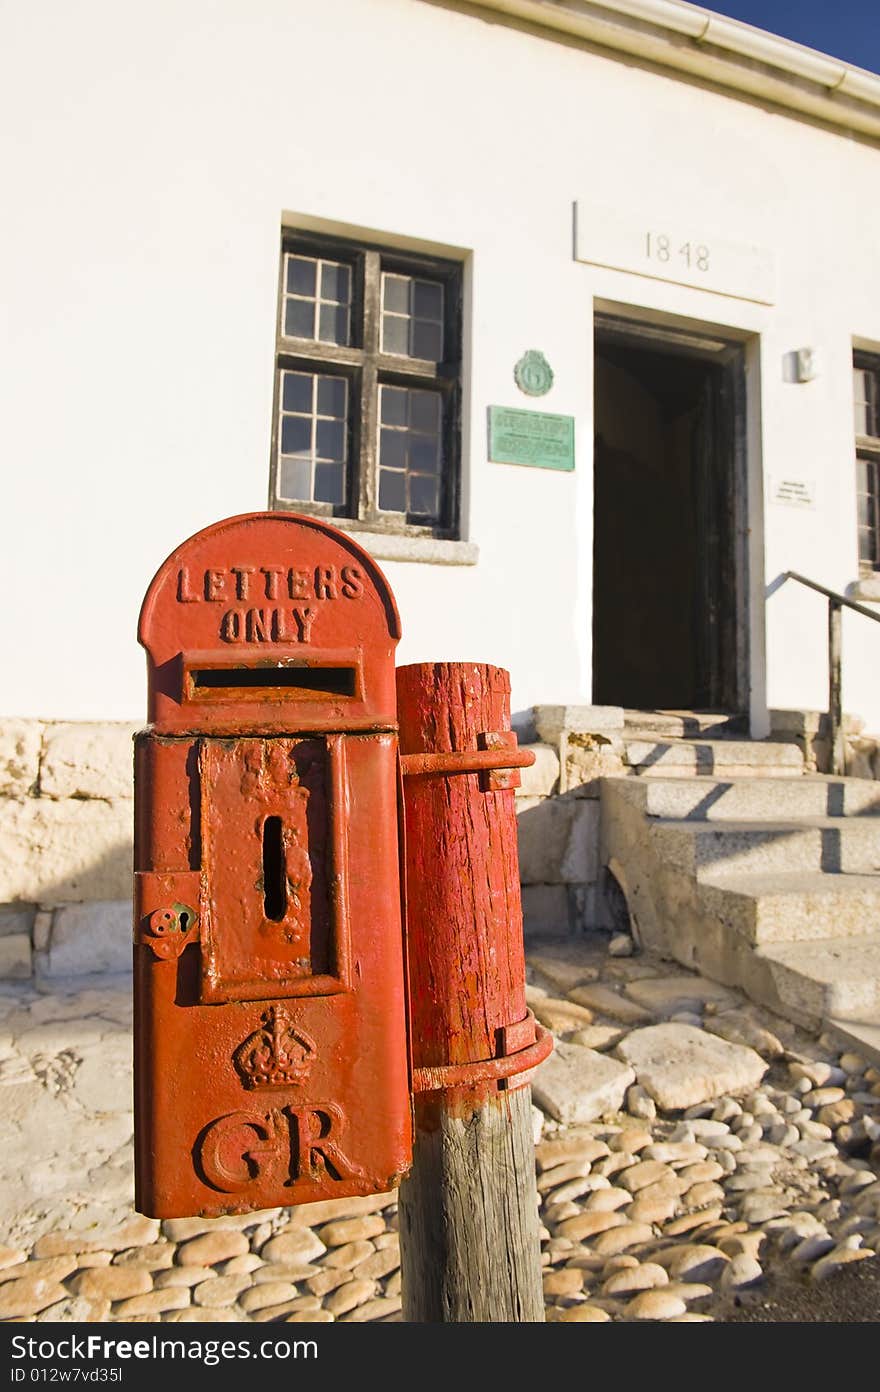 A historical mailbox at the lighthouse in Cape Aghullas, dating back to the 1800's and bearing the crest of King George V of England. Still in use. A historical mailbox at the lighthouse in Cape Aghullas, dating back to the 1800's and bearing the crest of King George V of England. Still in use.